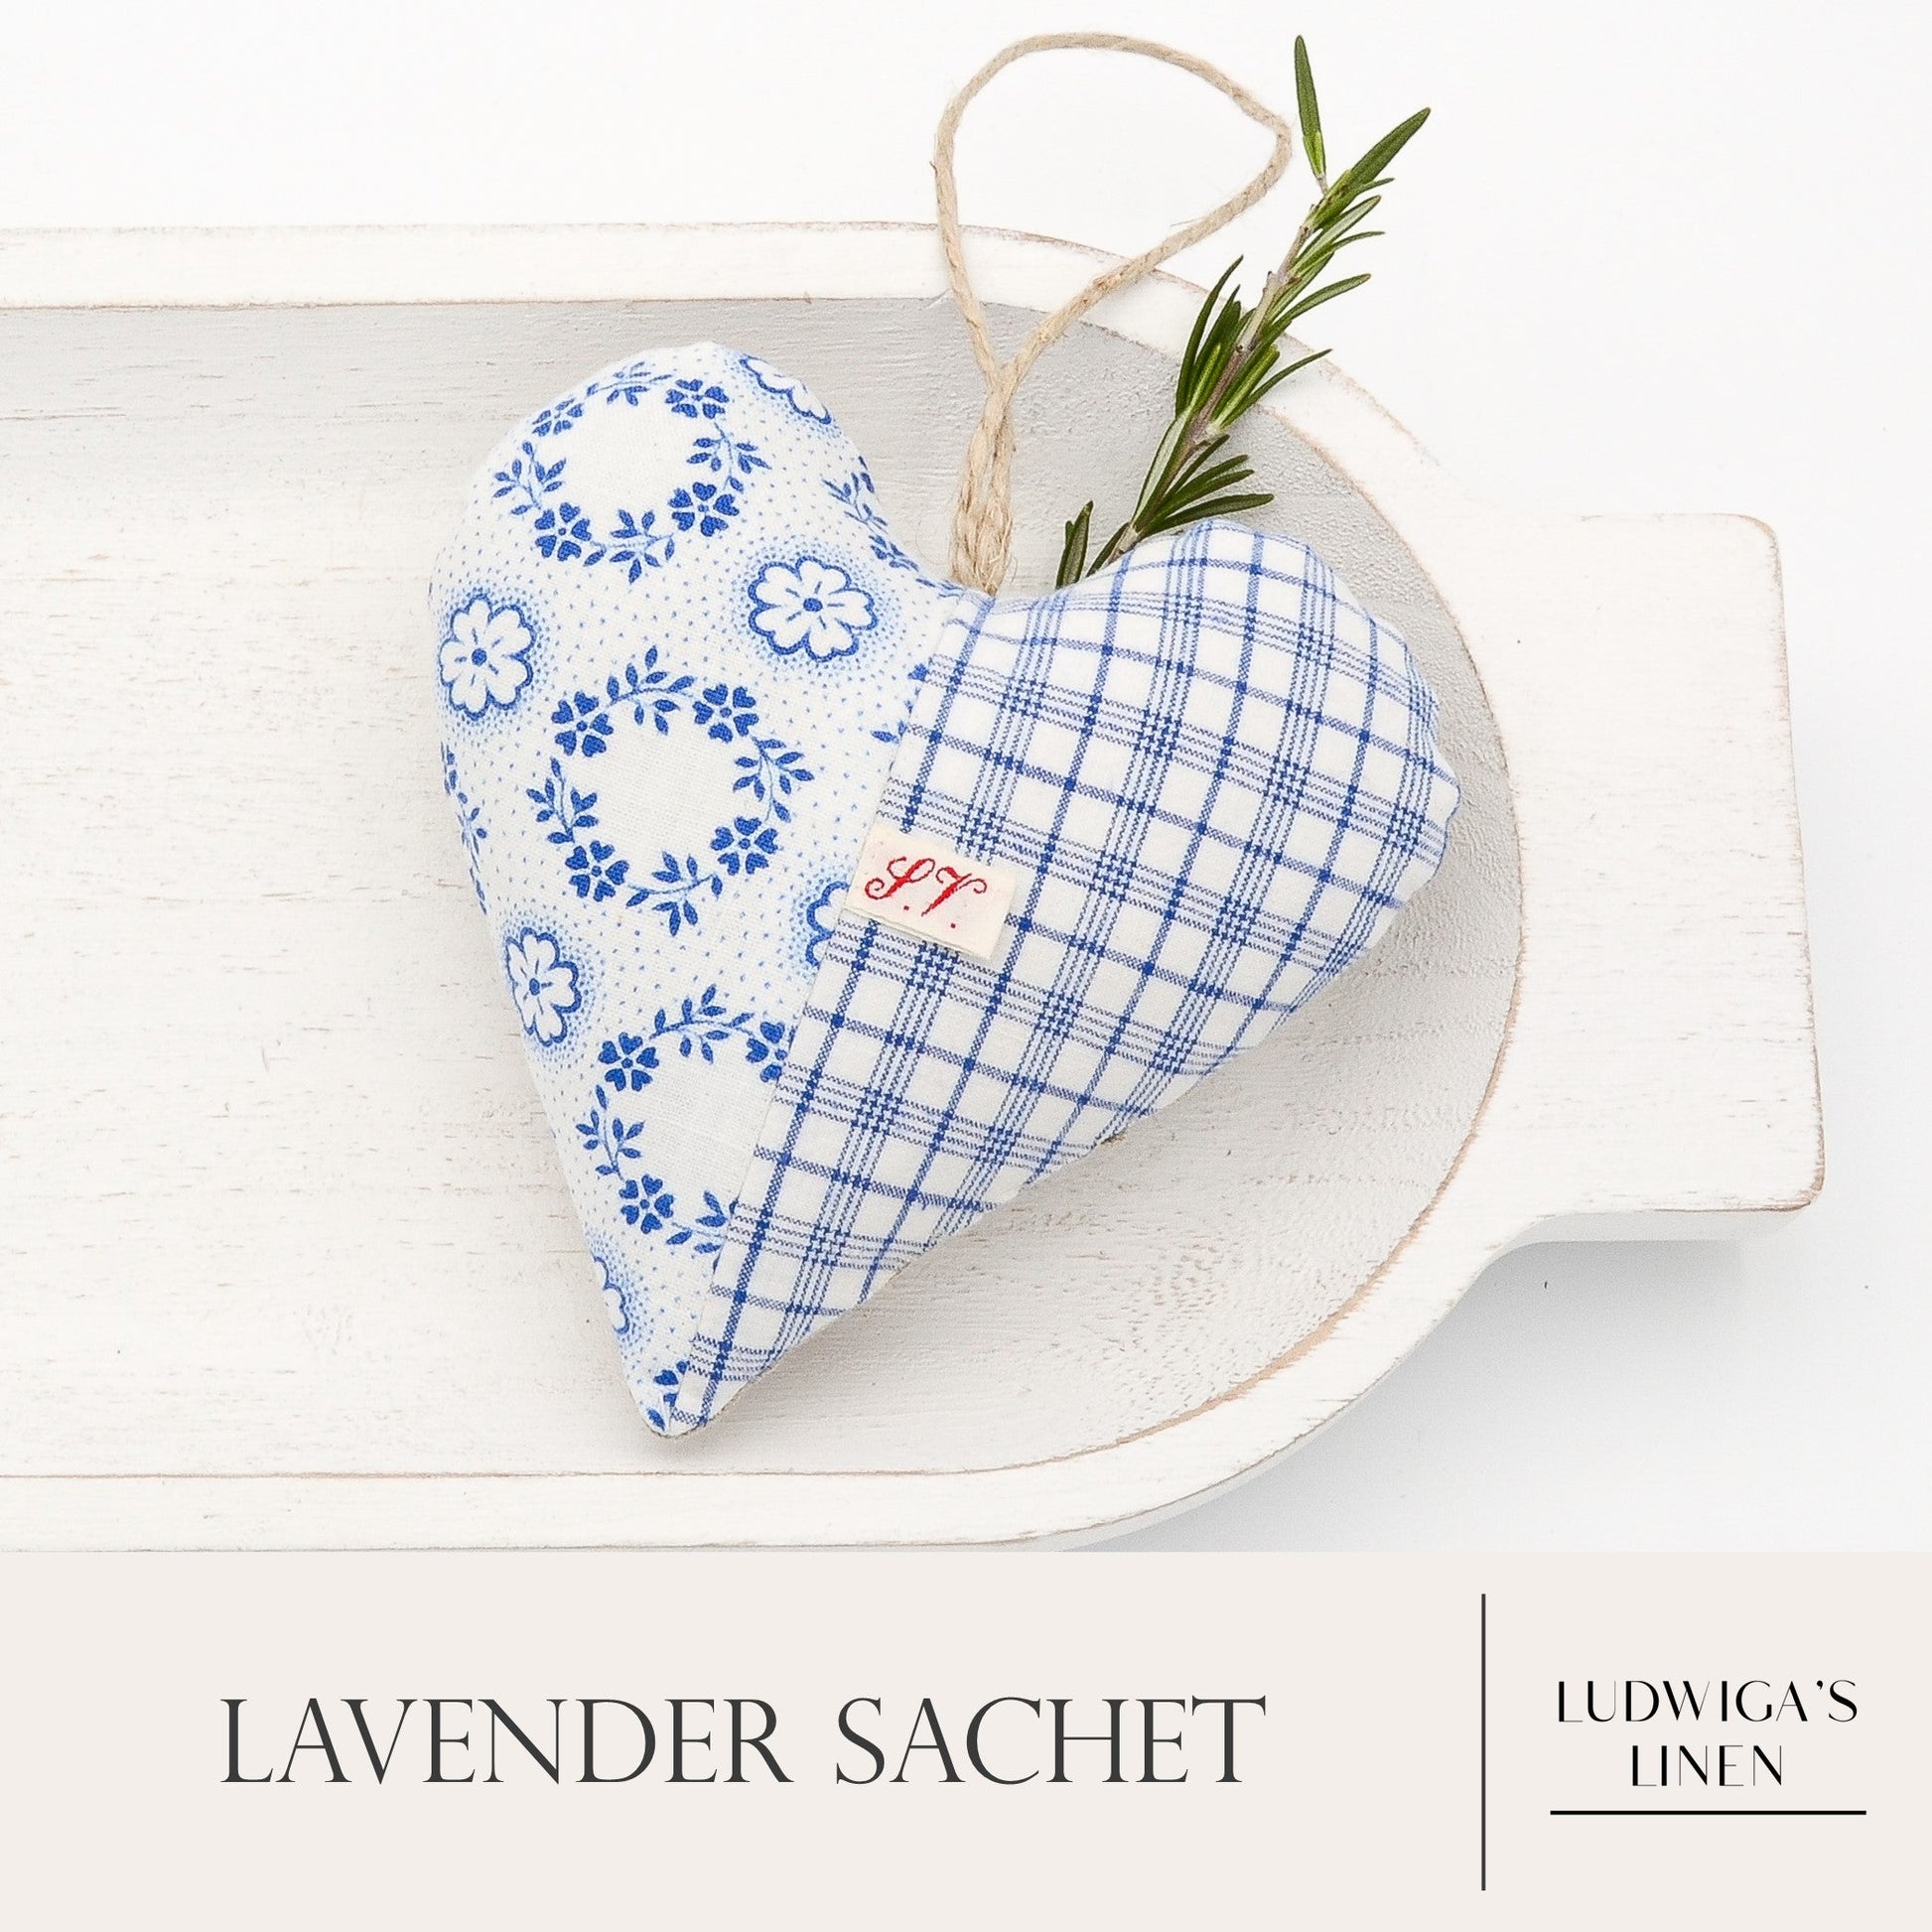 Antique/vintage German cotton lavender sachet heart, hemp twine tie and filled with high quality lavender from Provence France